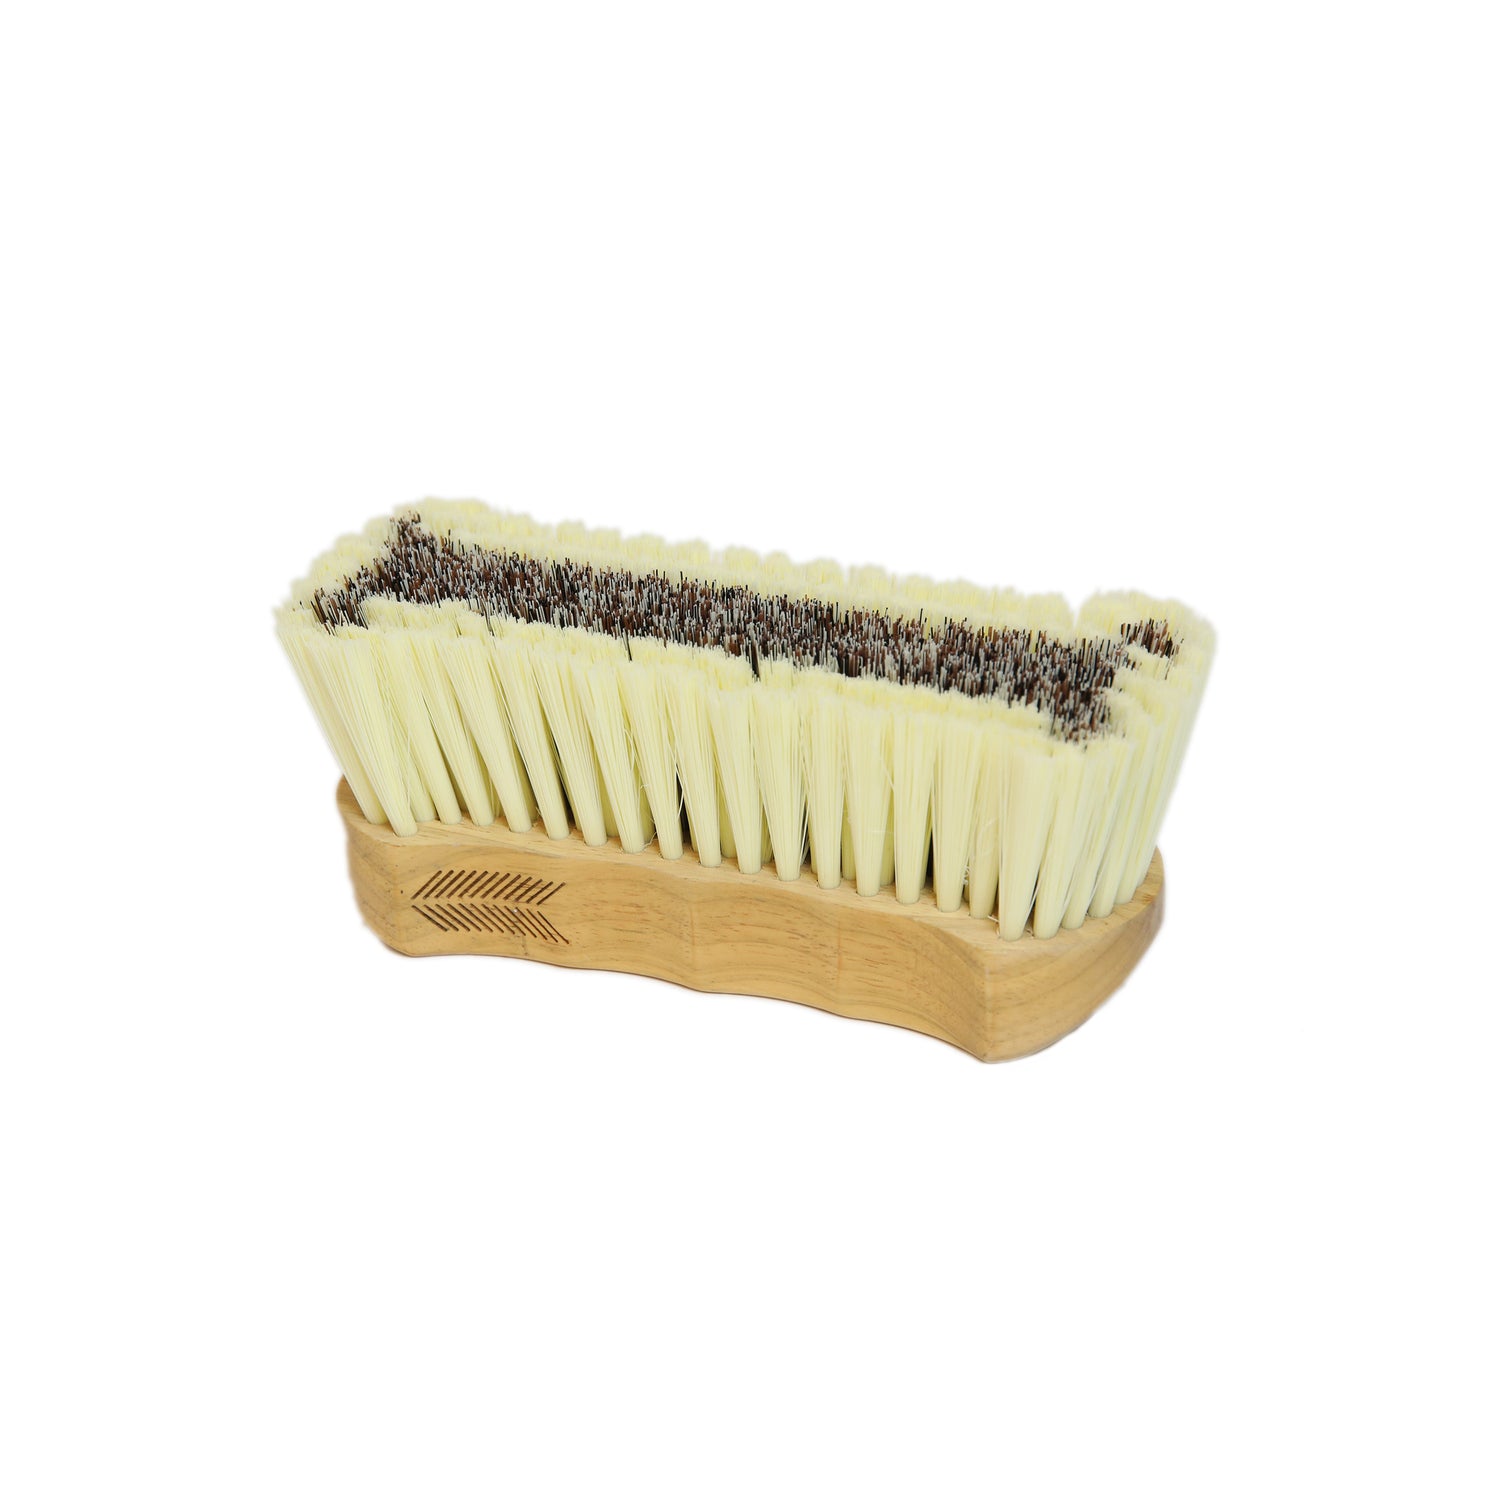 The Kentucky soft middle brush is the perfect body brush for polishing off your horse. This brush is used towards the end of your grooming session to remove the last of the dust and stray hairs and do the final finishing touches to your horse.